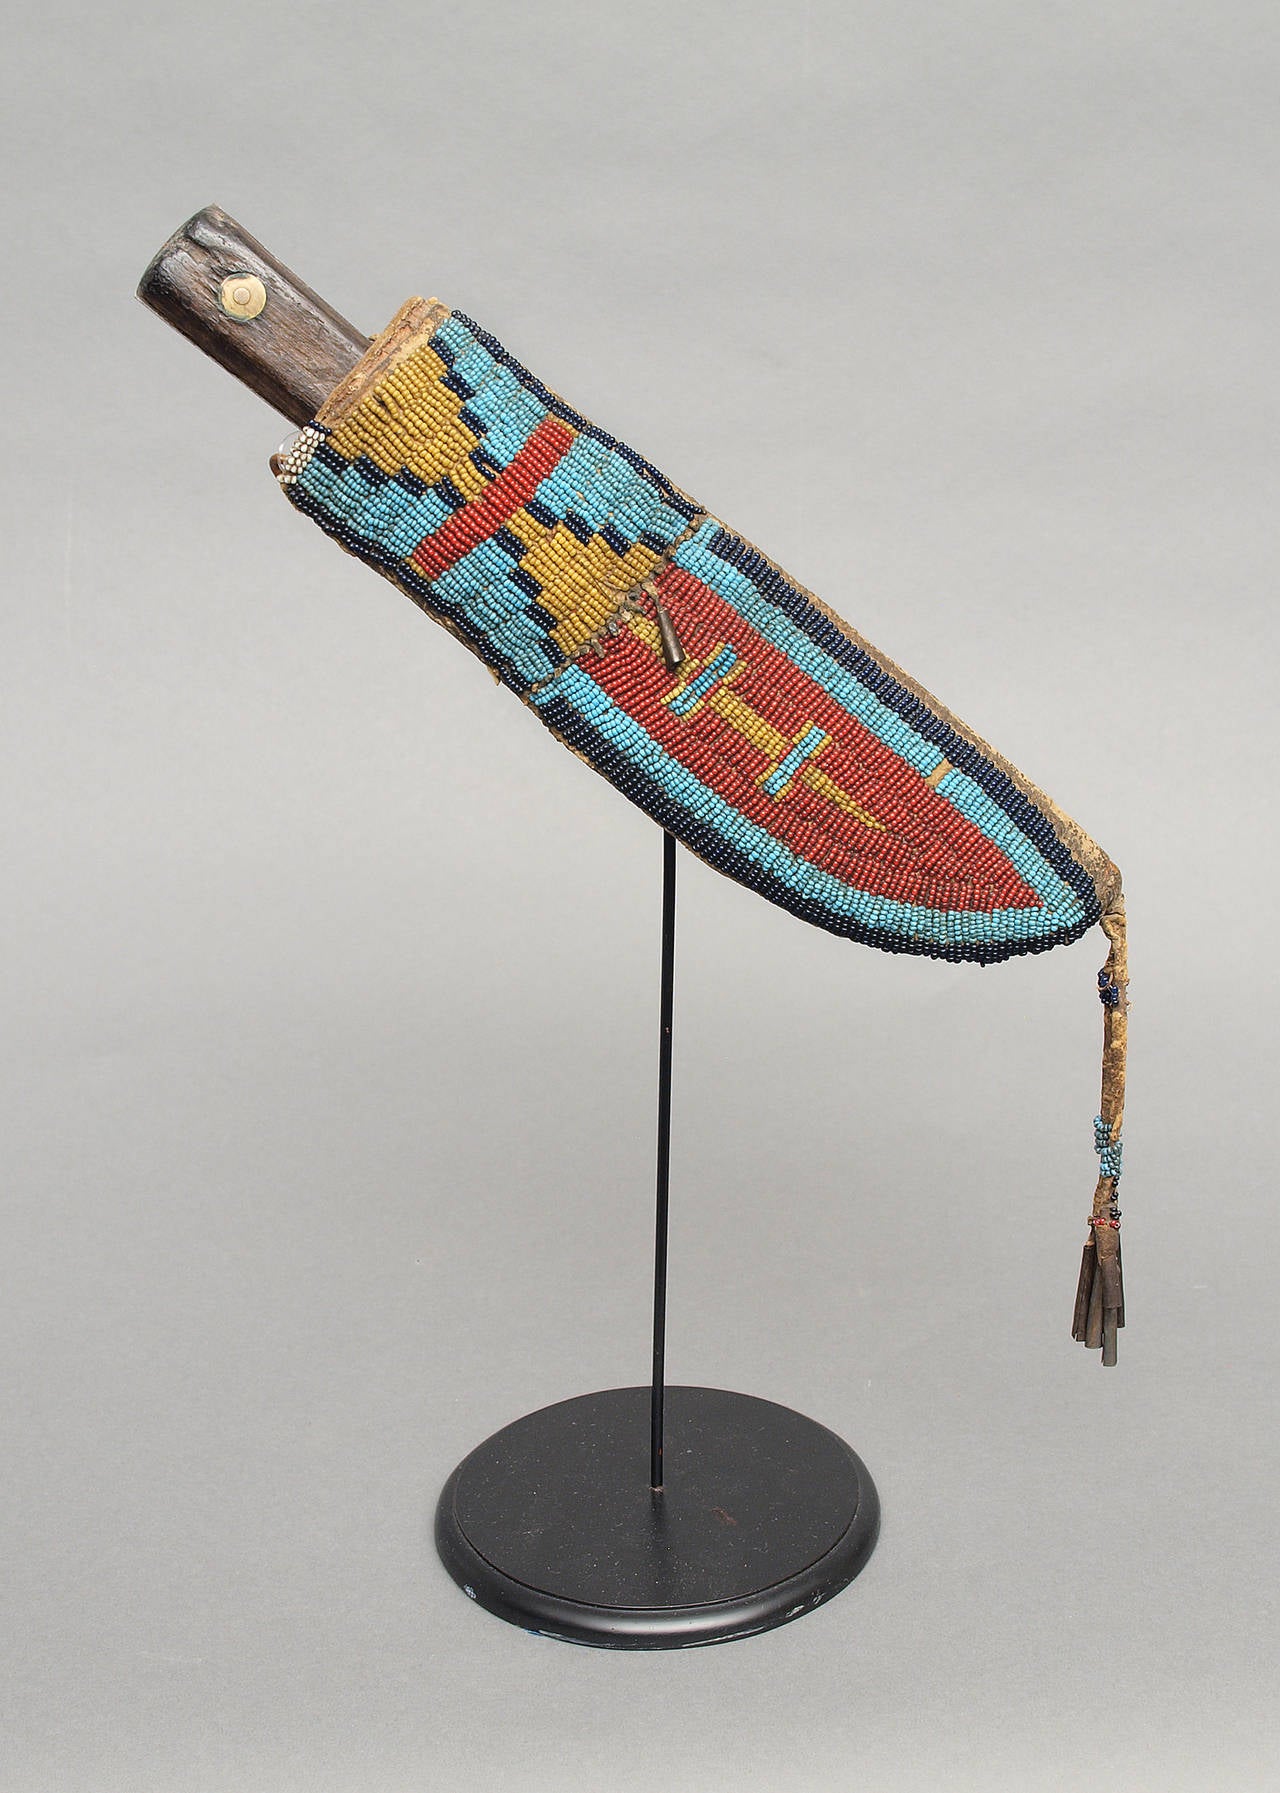 This sheath is constructed of native tanned hide with red, yellow, light and dark blue trade beads and sinew sewn. Geometric designs down the front panel, finished with a partially beaded bifurcated suspension with tin cone danglers. Created by a